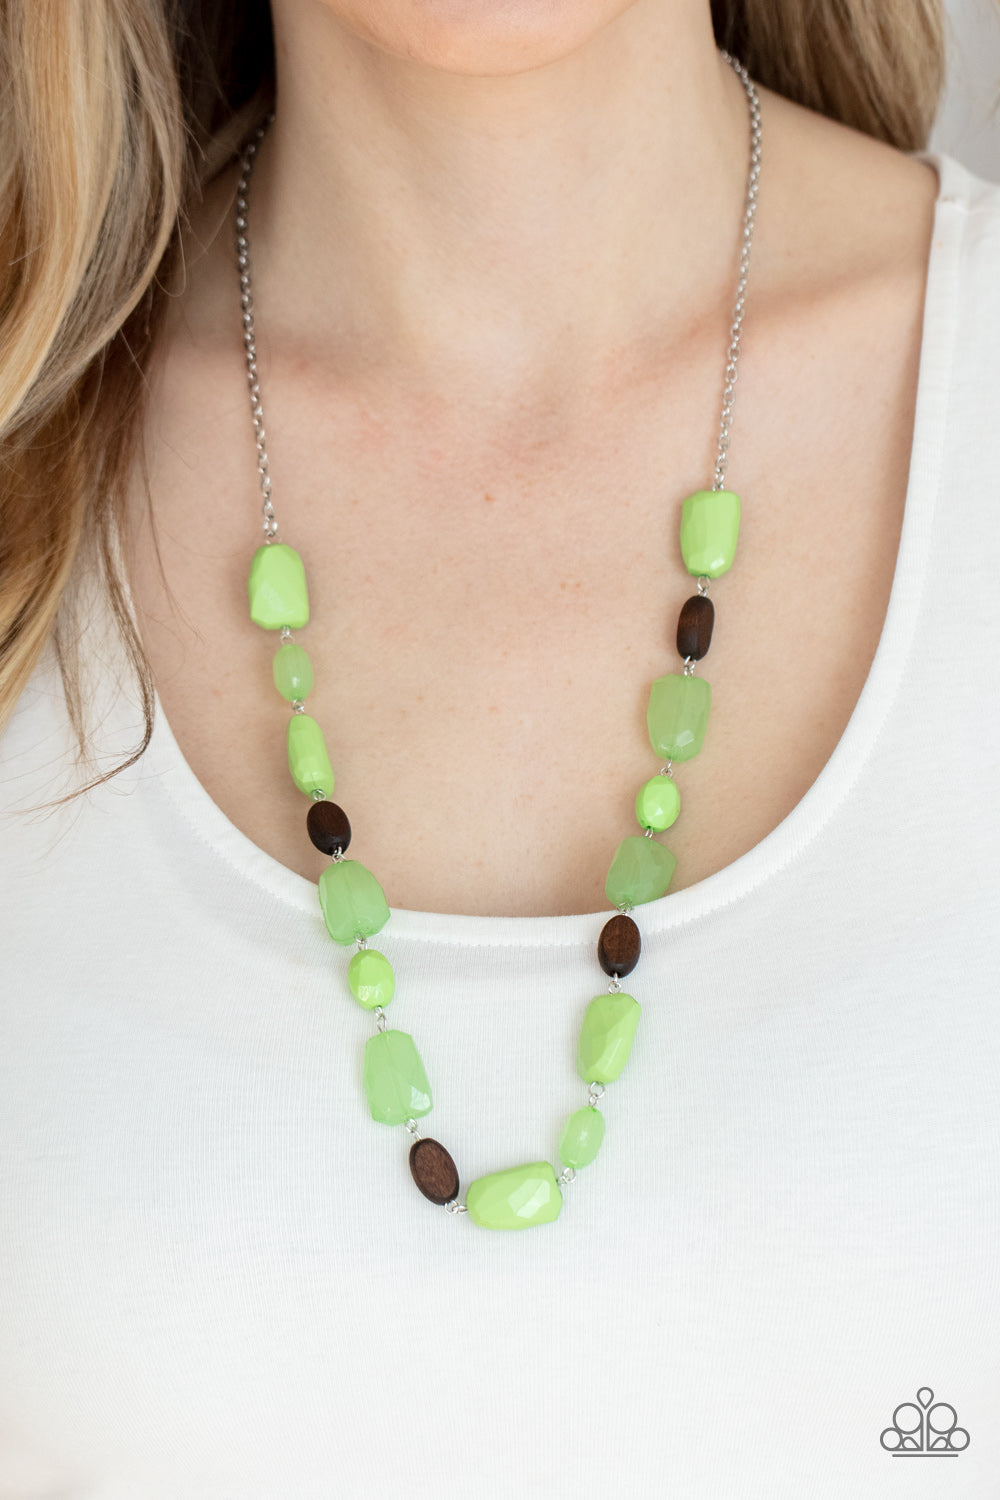 Meadow Escape Green Necklace - Paparazzi Accessories  Varying in opacity, a mixed assortment of faceted Apple Green beads delicately link with dainty wooden beads across the chest, creating a whimsically earthy display. Features an adjustable clasp closure.  All Paparazzi Accessories are lead free and nickel free!  Sold as one individual necklace. Includes one pair of matching earrings.